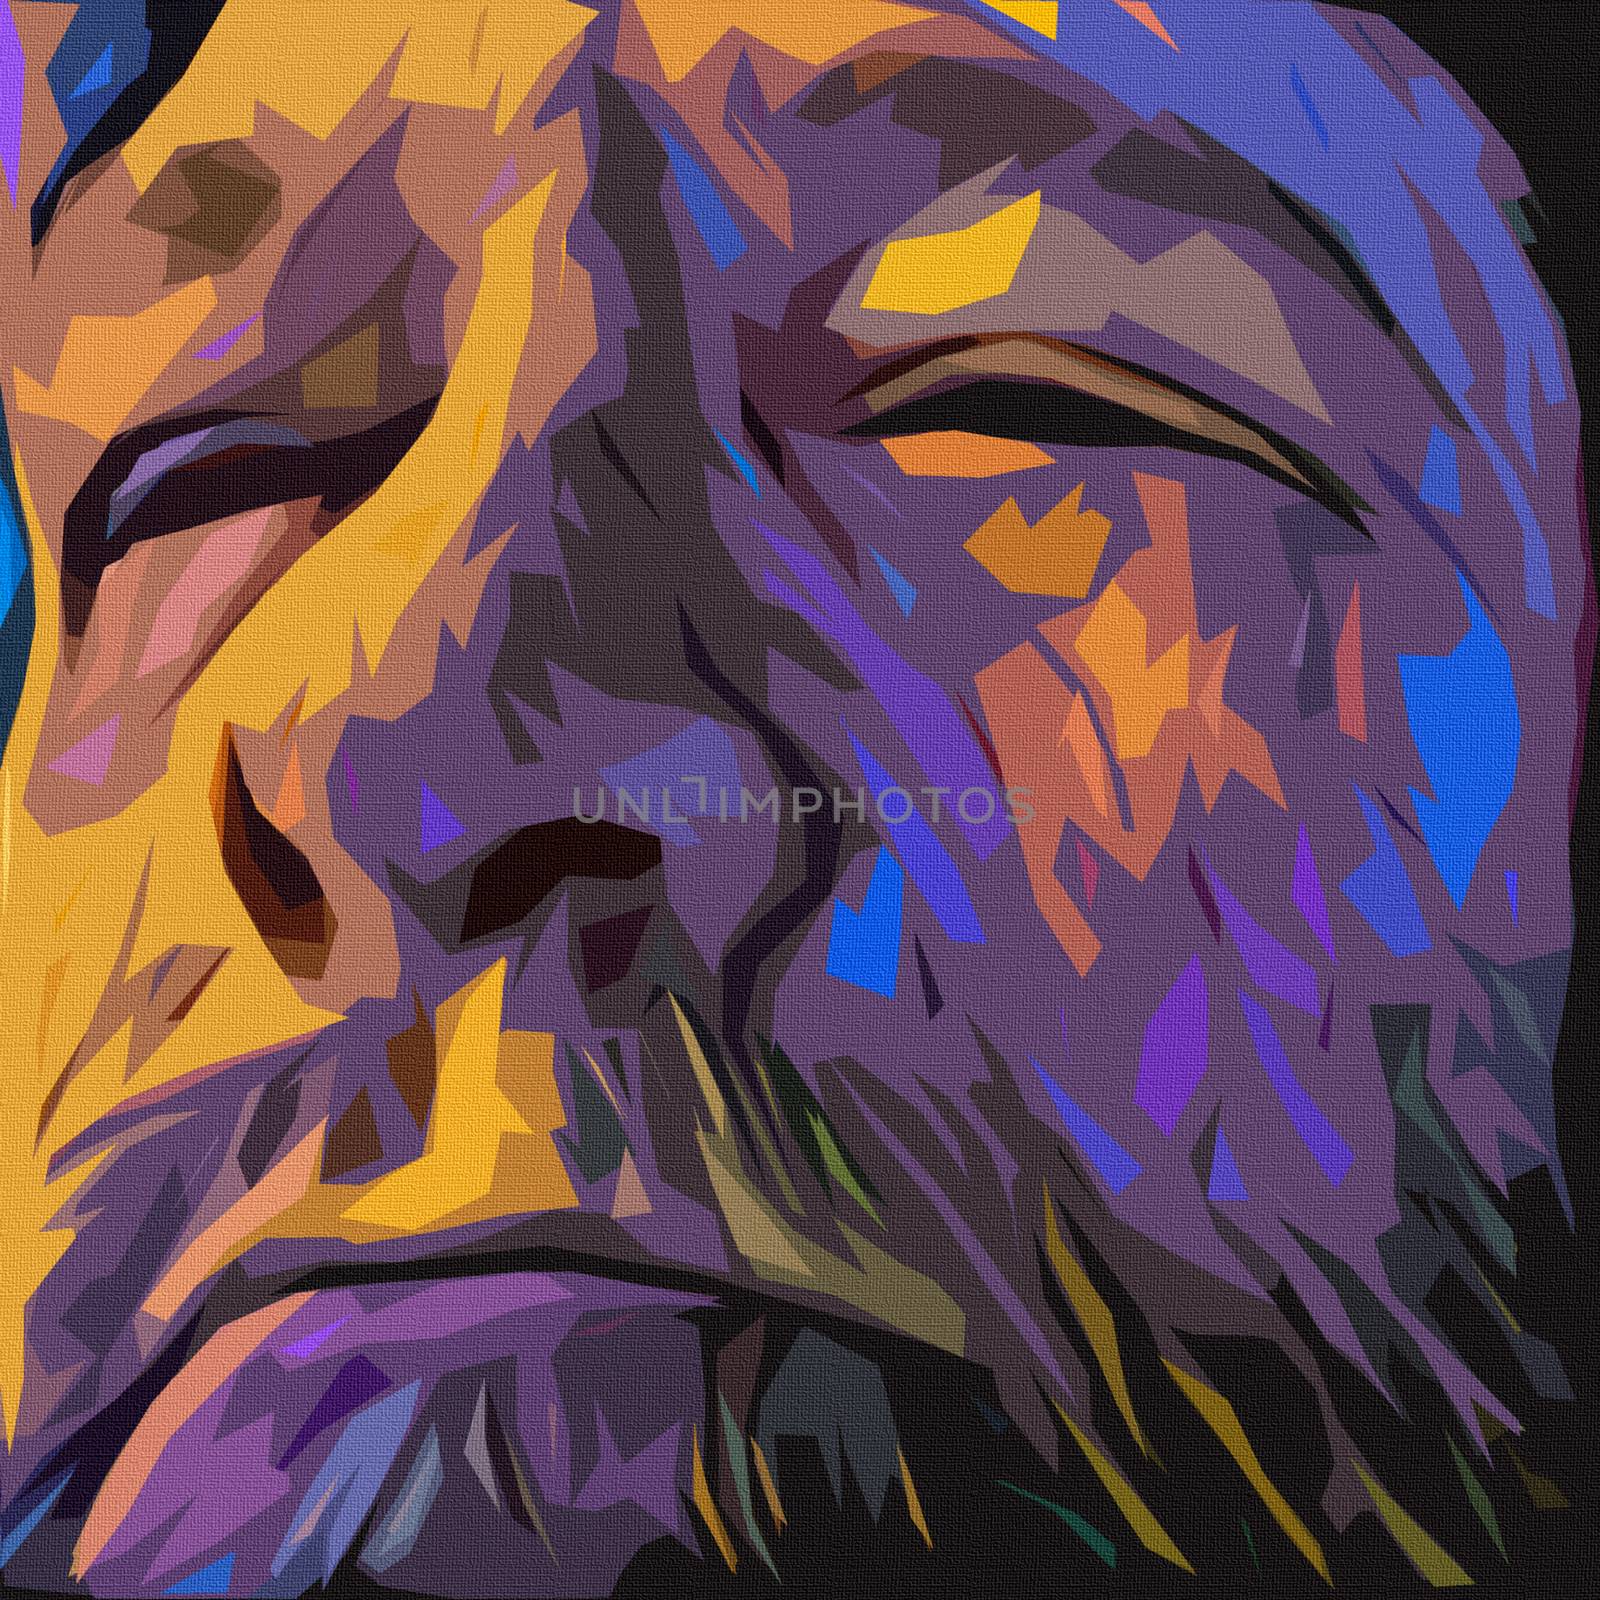 Surreal painting. Old man's face in purple colors.